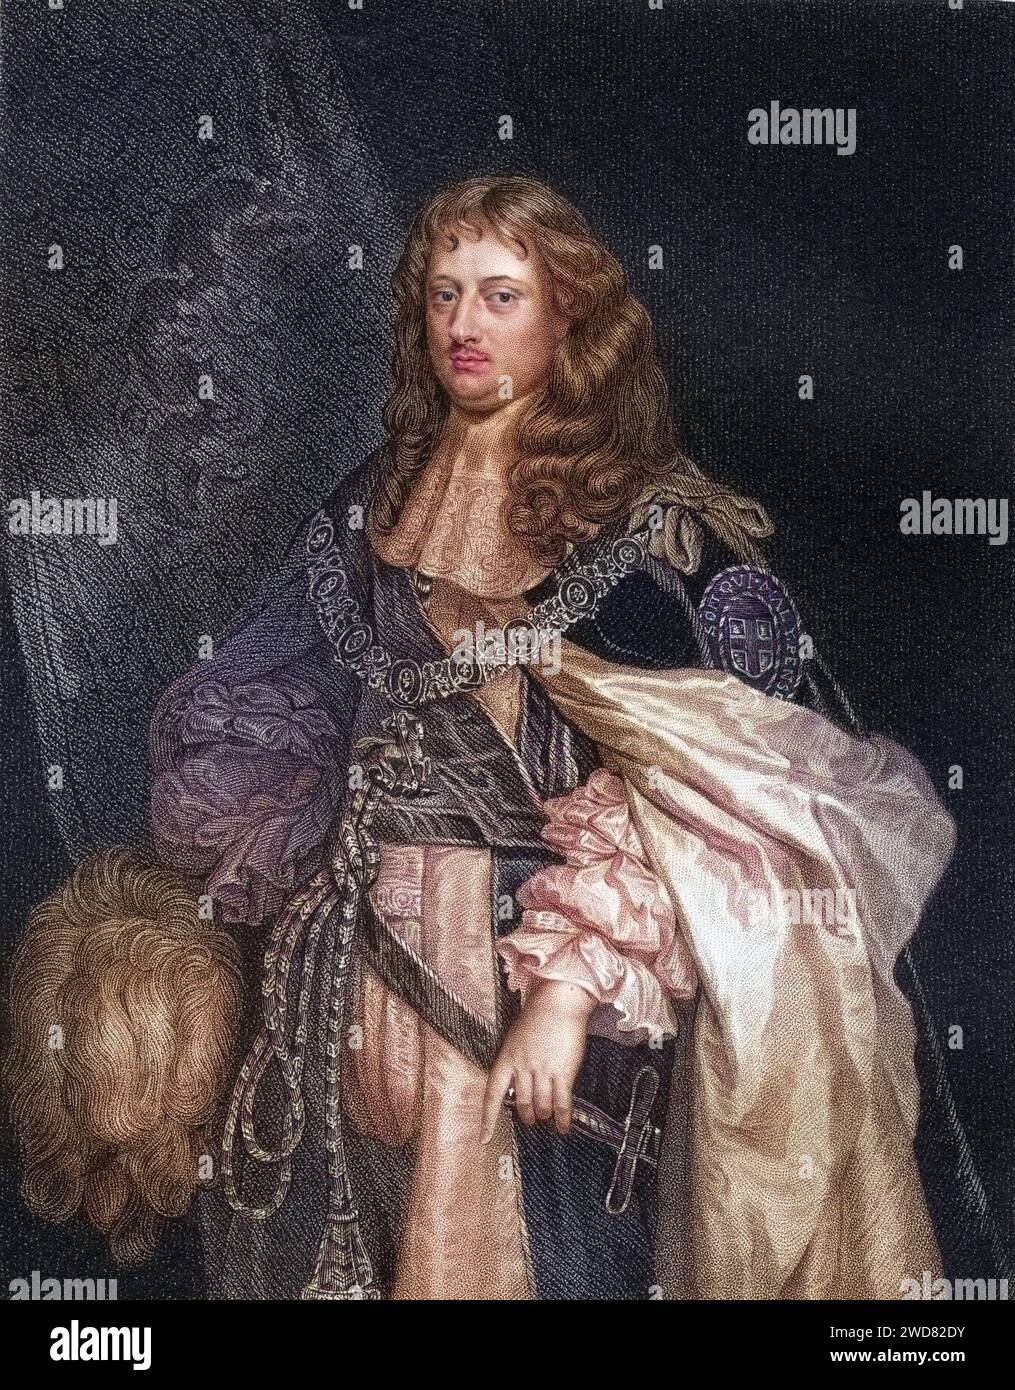 Edward montagu hi-res stock photography and images - Page 2 - Alamy